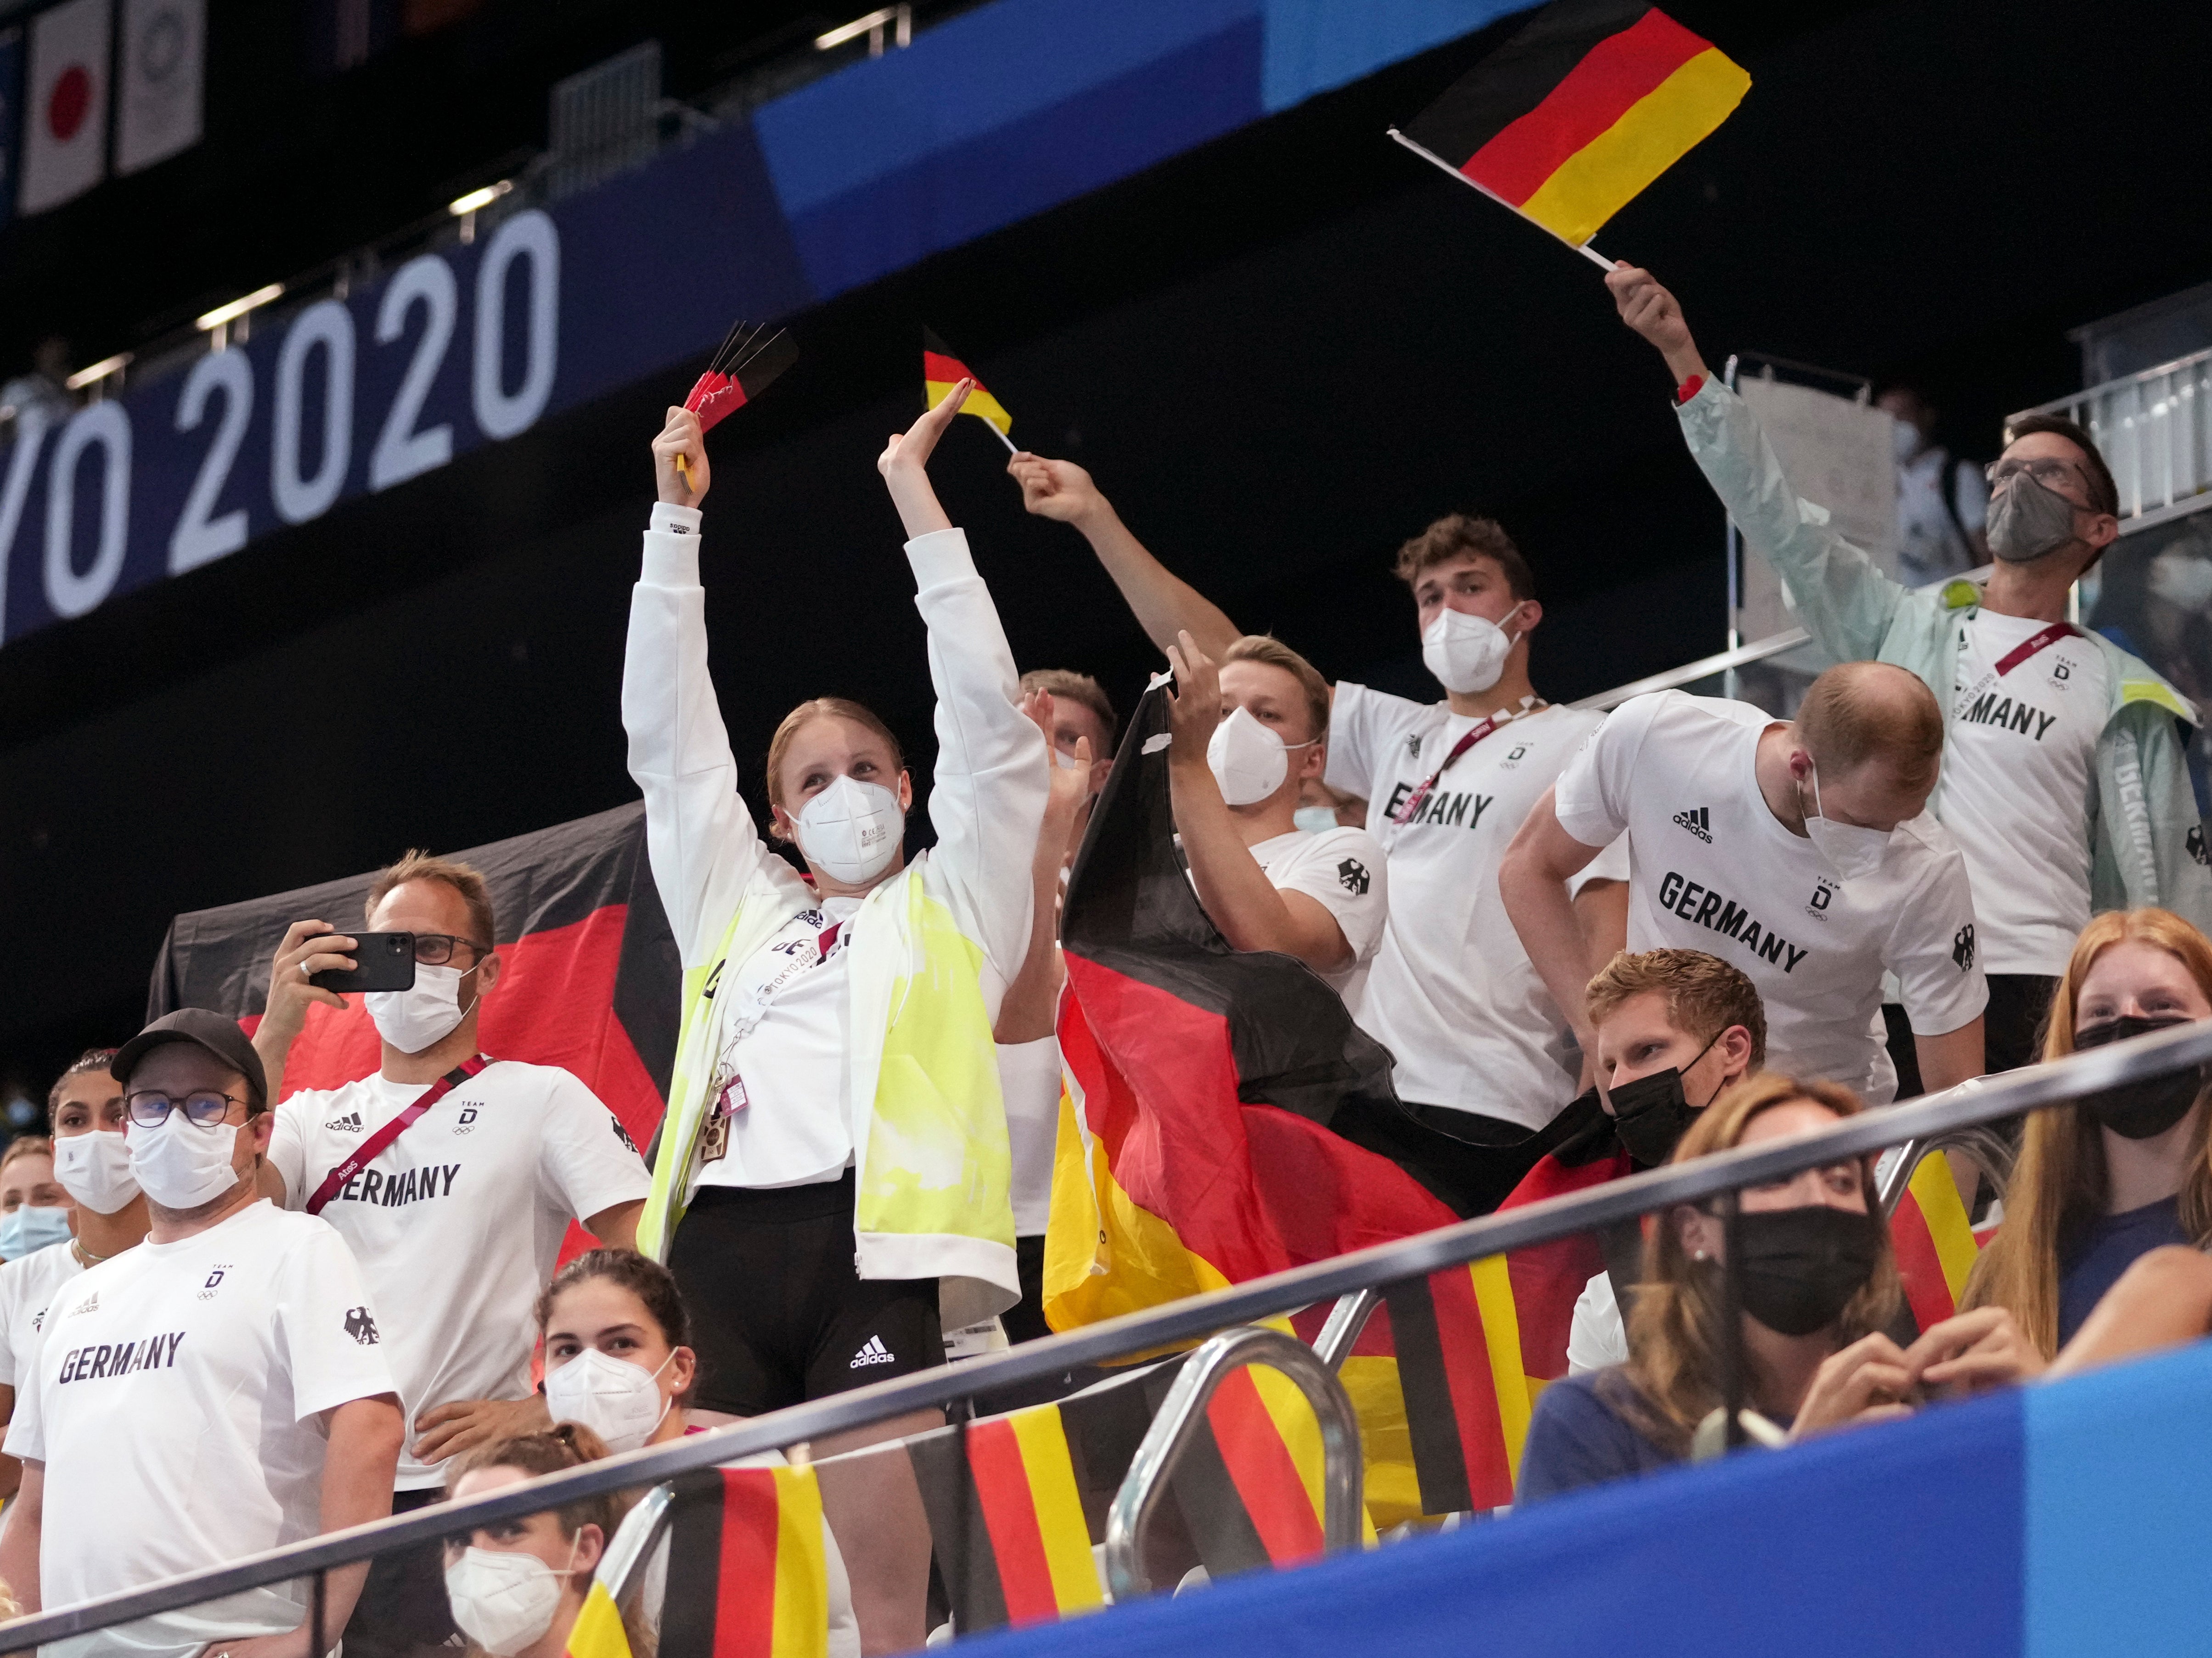 German swim team members cheer on their teammates during swimming competitions at the 2020 Summer Olympics, Saturday, July 24, 2021, in Tokyo, Japan.